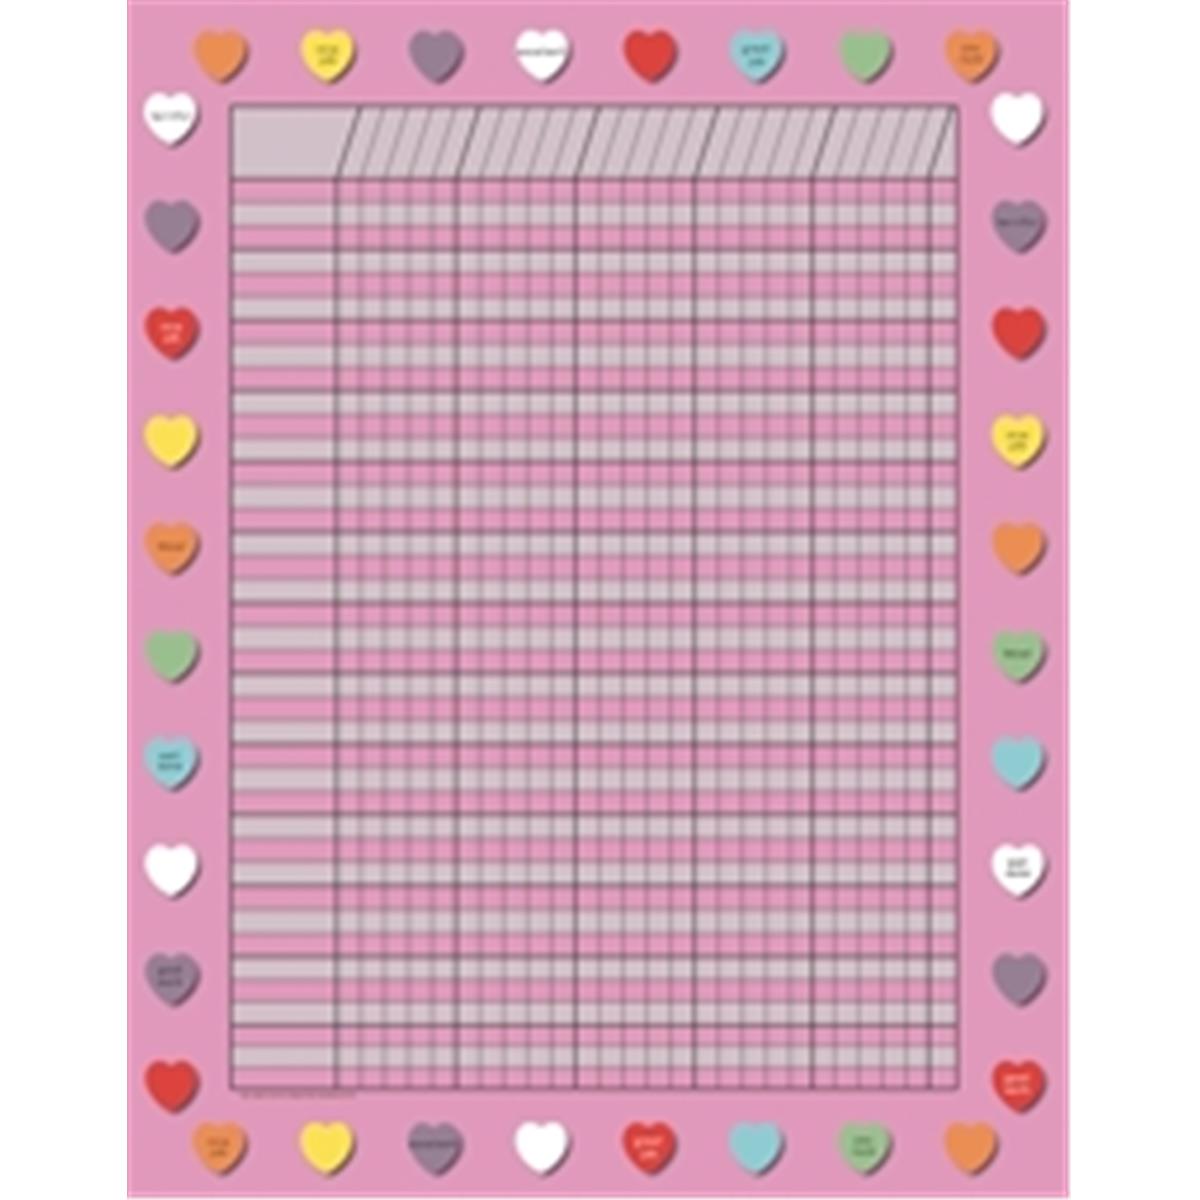 Se-3349 22 X 28 In. Vertical Chart Theme, Valentines Pink - February